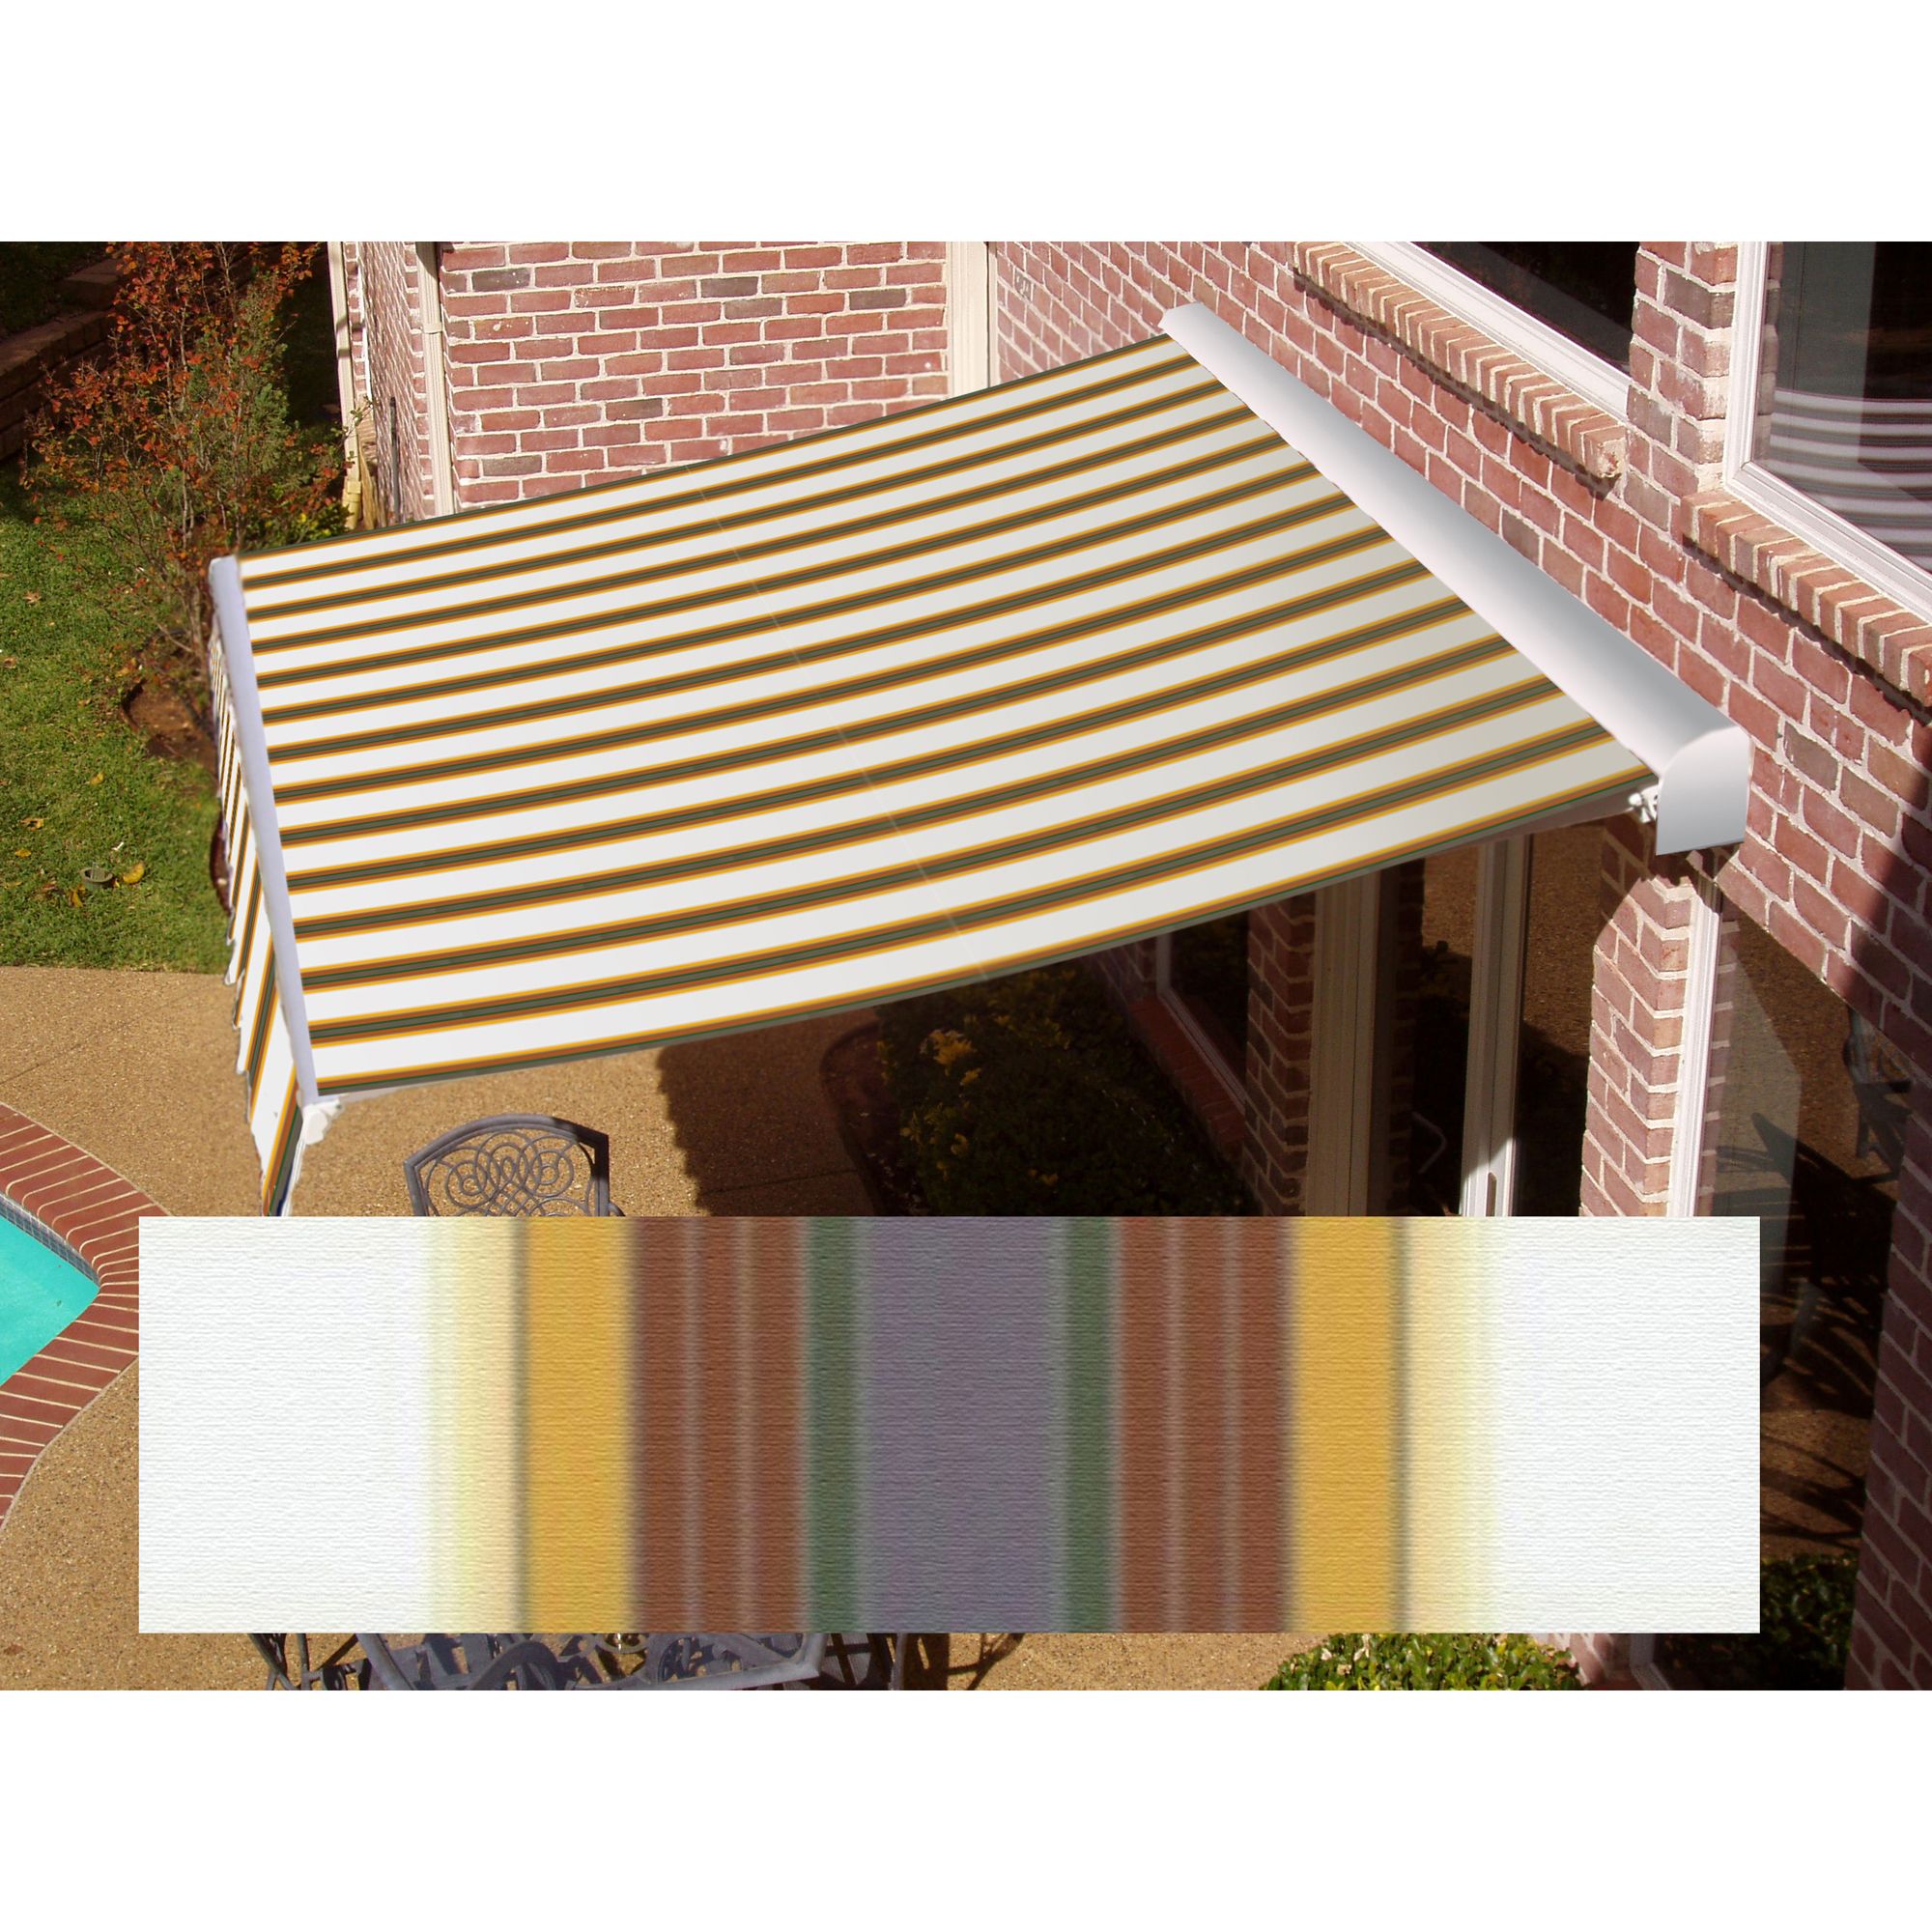 DESTIN&#174; LX Motorized Retractable Awning  with Hood - Terra Cotta/Tan